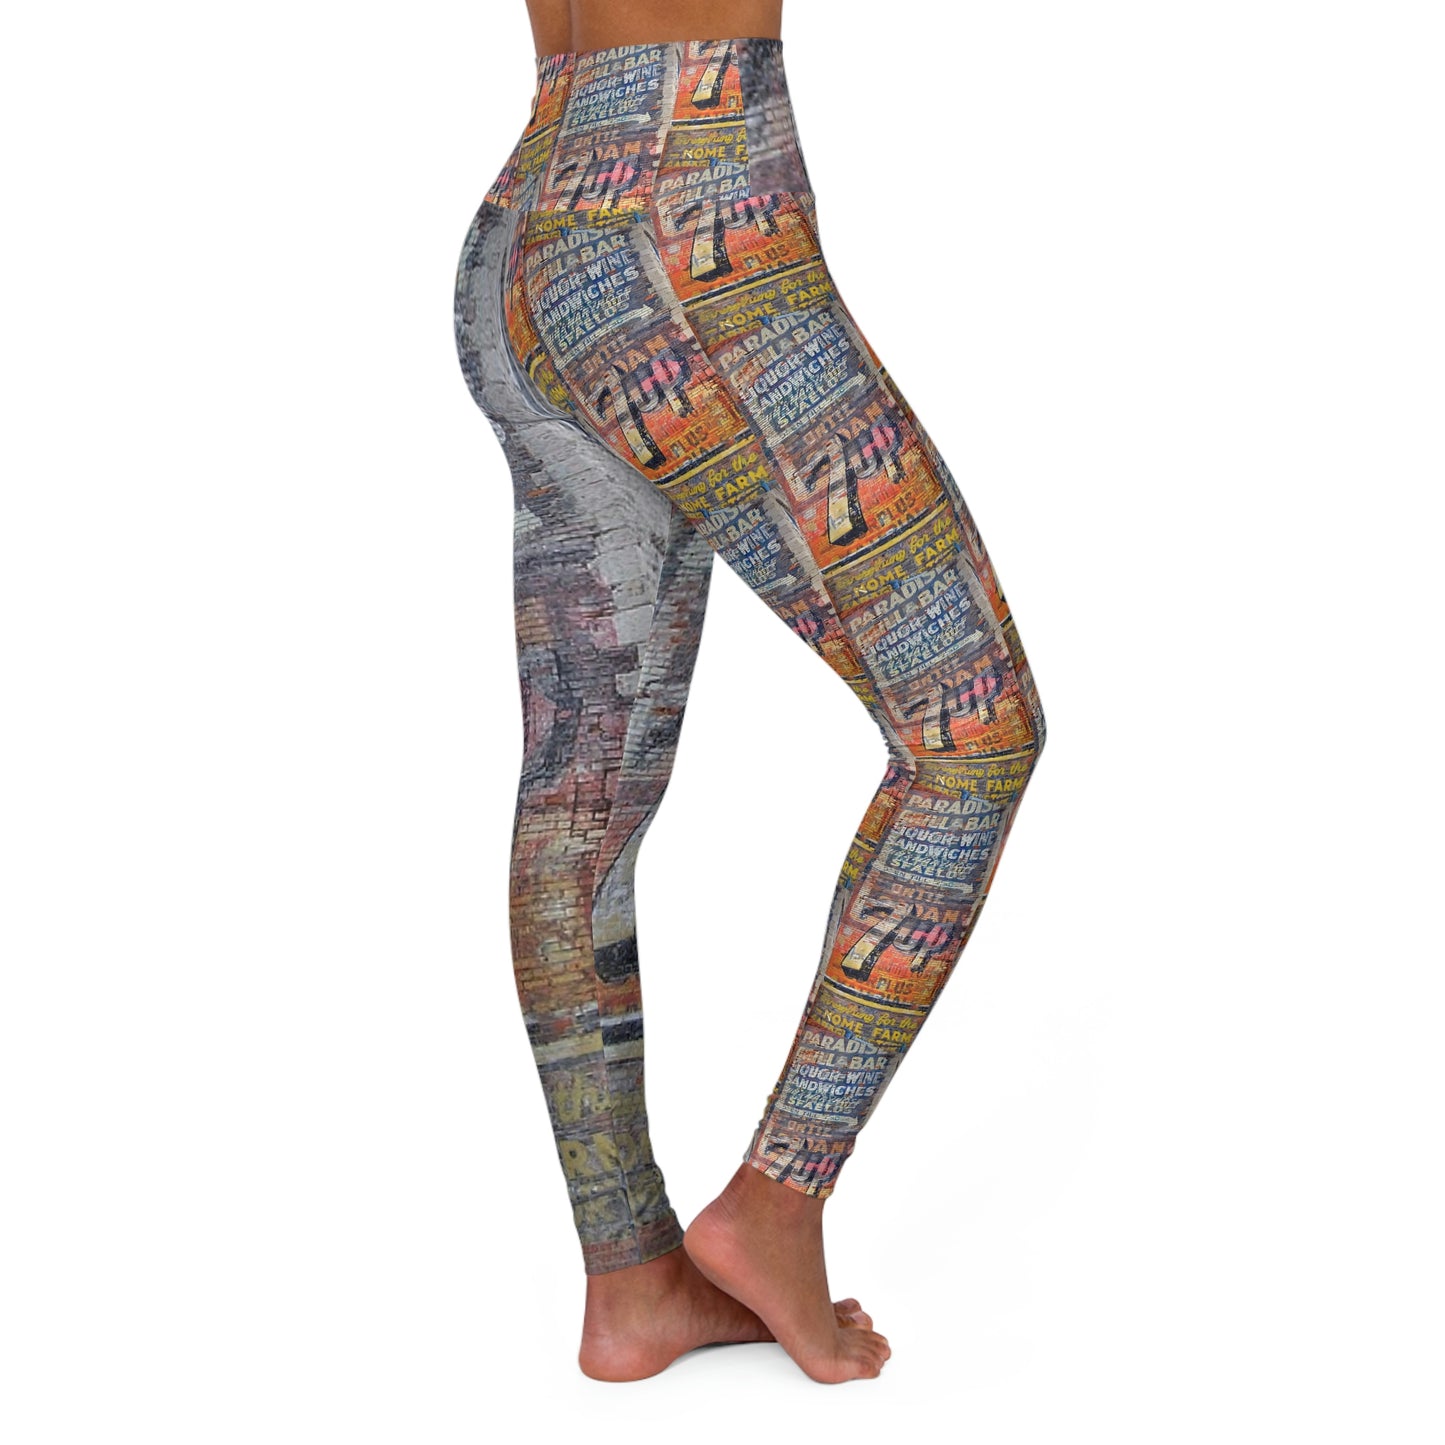 7up Yoga-Leggings mit hoher Taille (AOP)